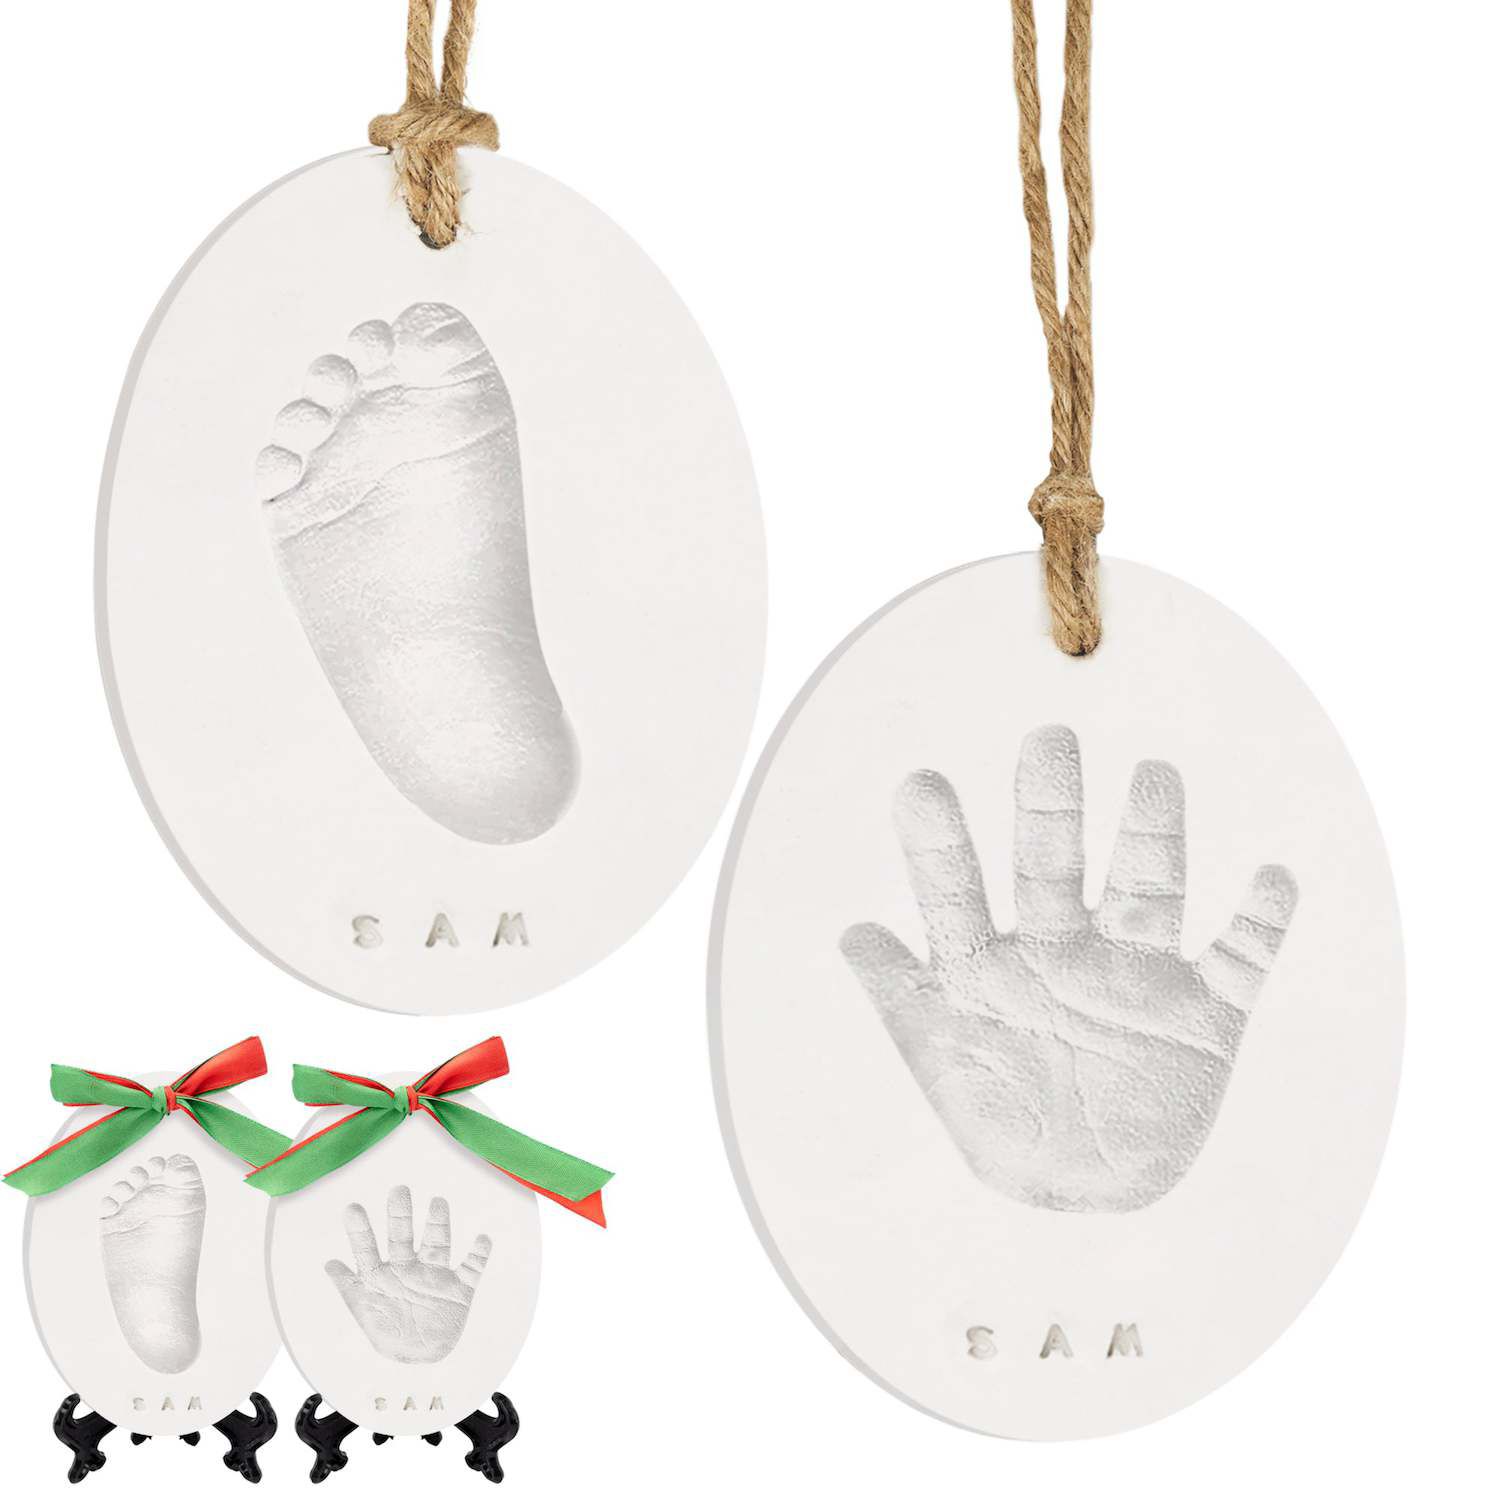 ZXT-parts 9x7 Baby Picture Frames Handprint and Footprint Kit. Photo Frame for Newborn. Opening 4.7x3.1 inch. White.